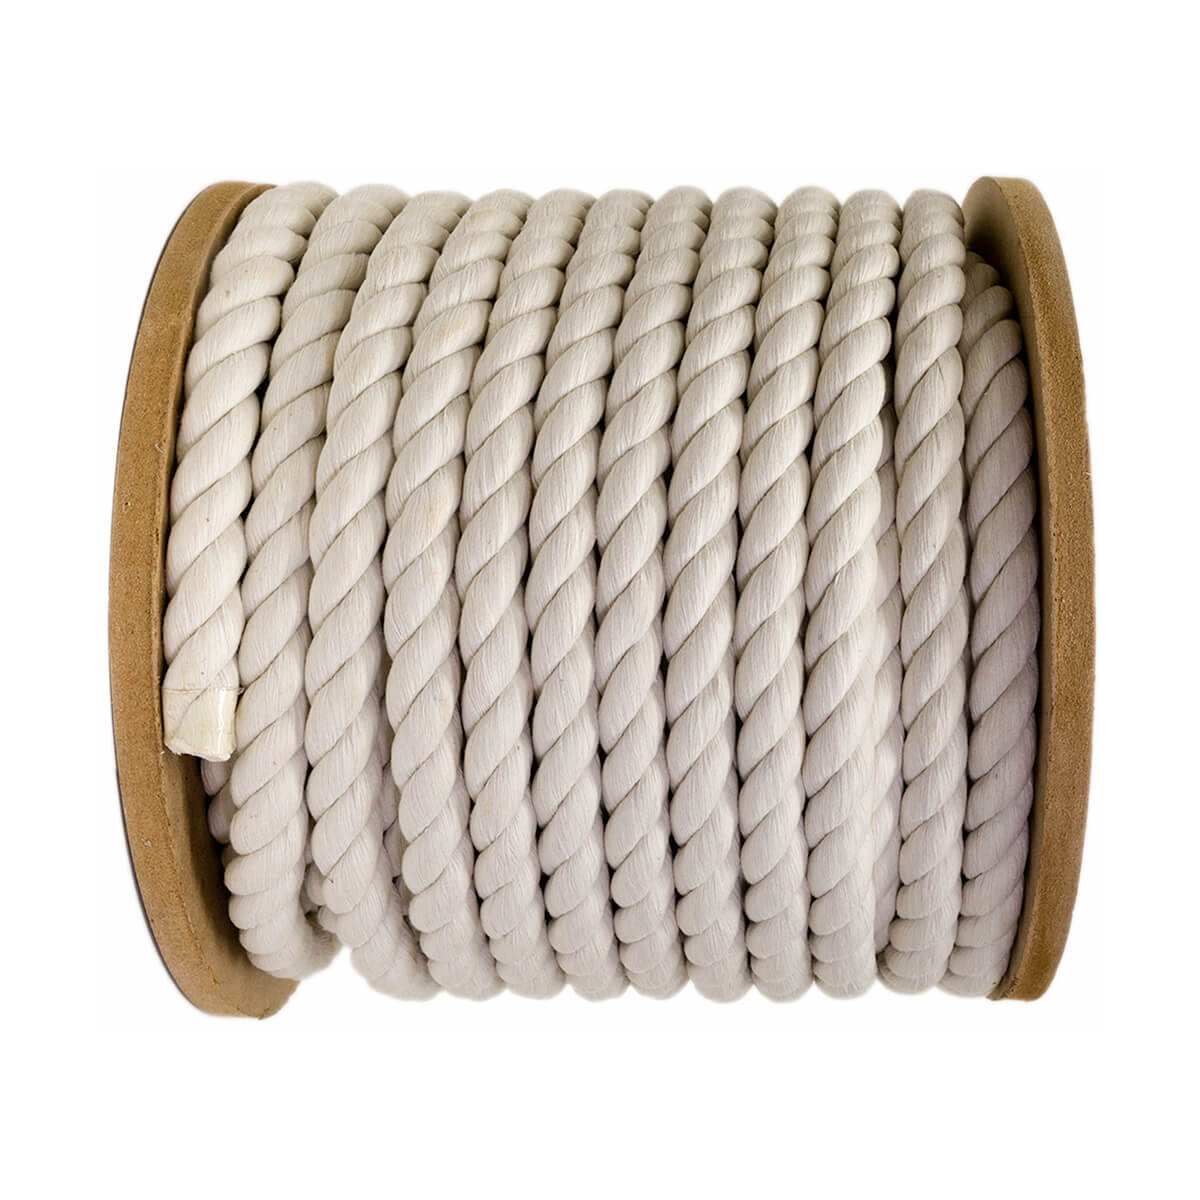 Twisted Cotton Rope - 3/4-in - Price / ft